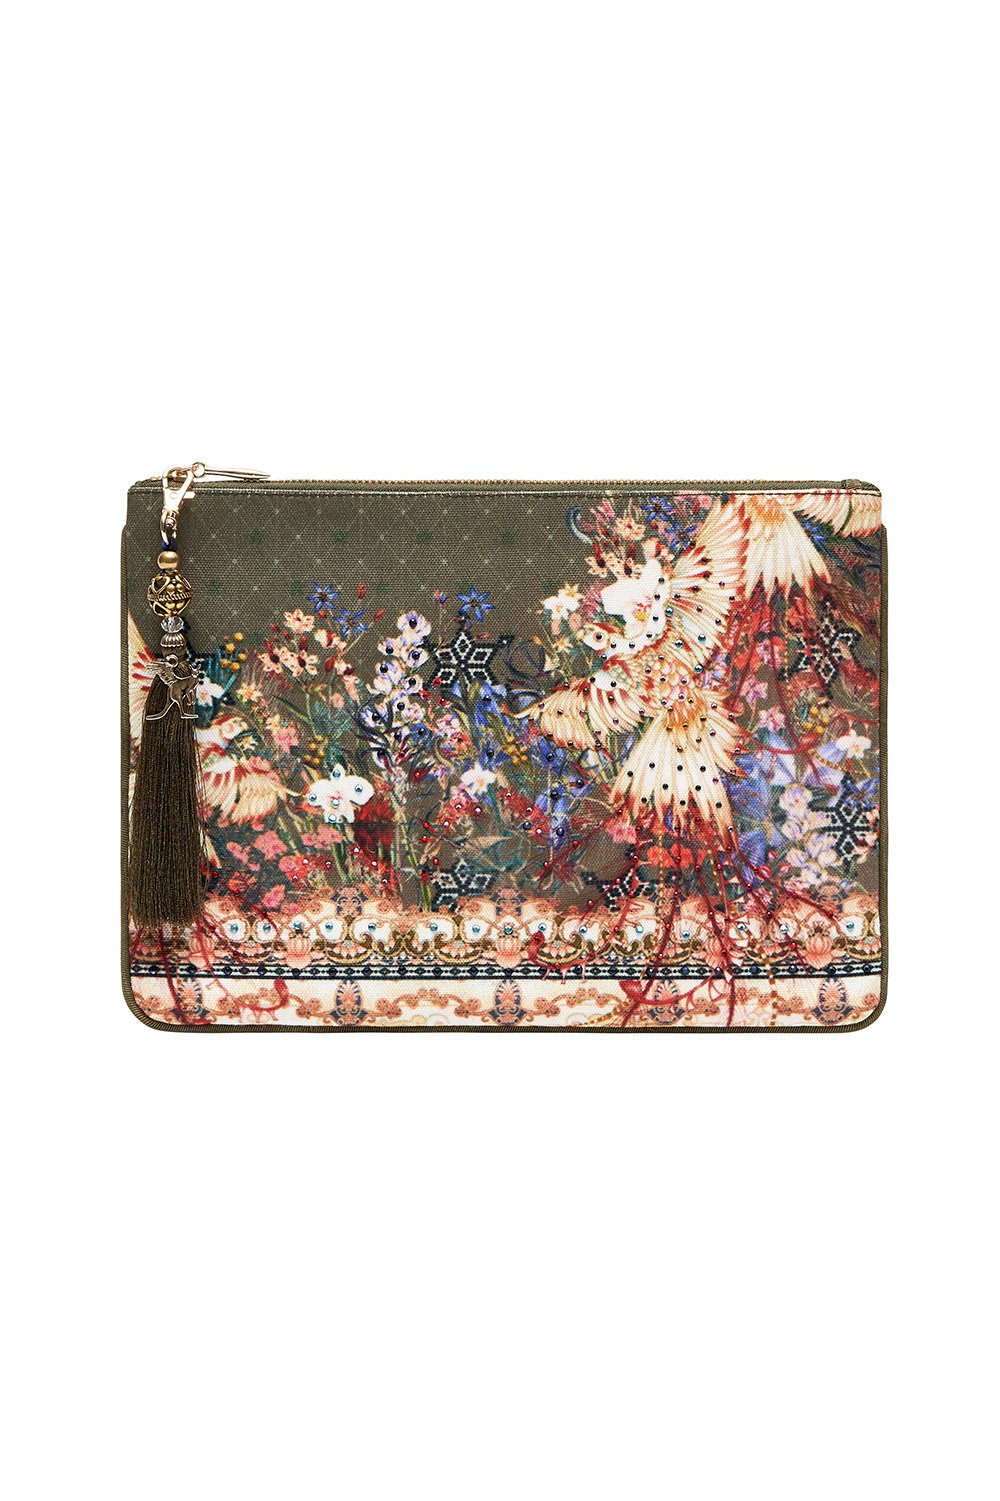 SMALL CANVAS CLUTCH WATCHFUL WINGS